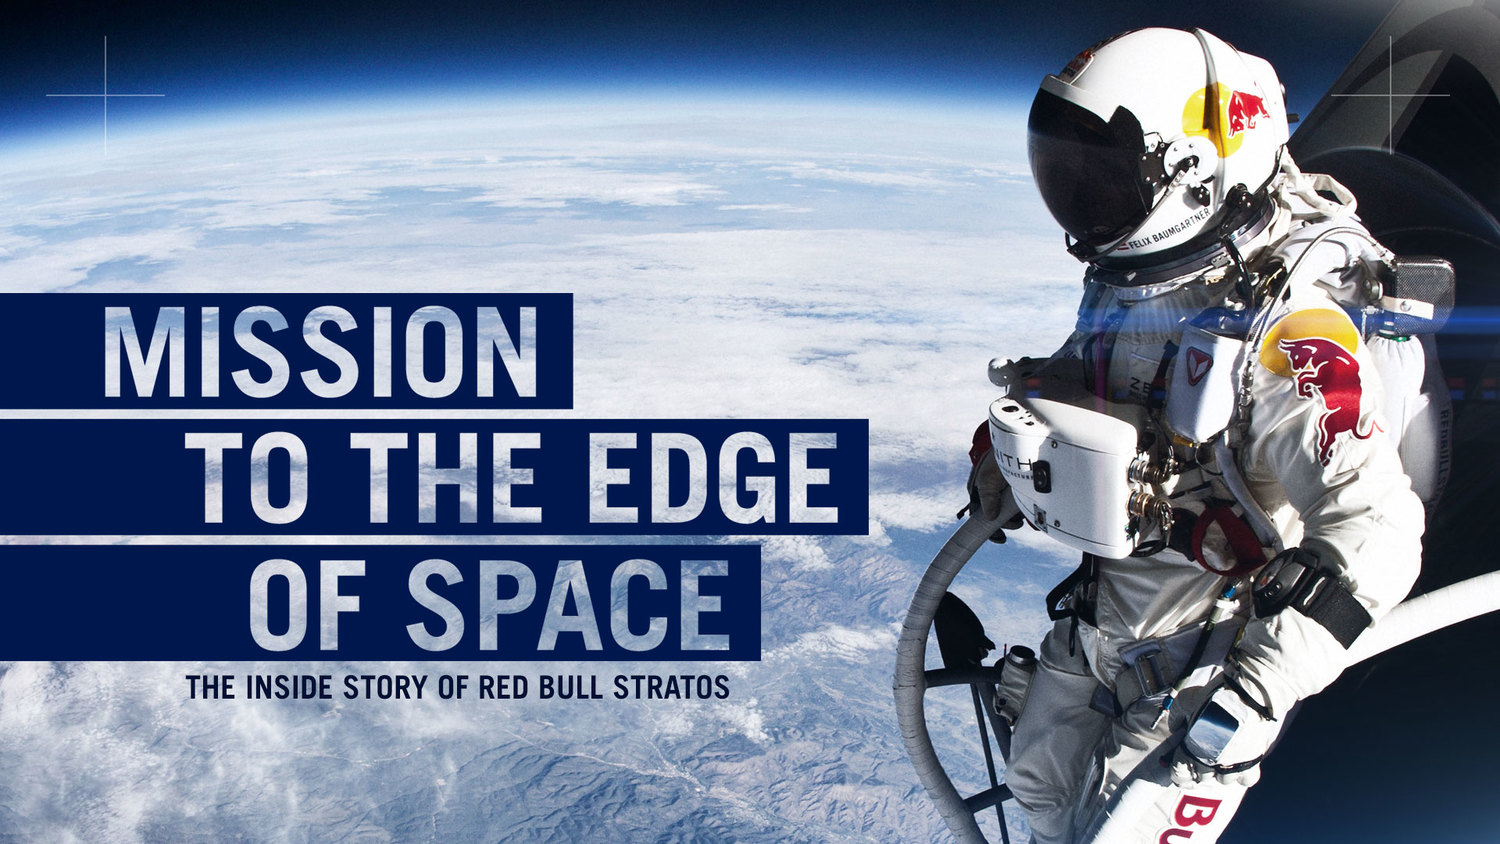 Red Bull Stratos: Mission to the Edge of Space